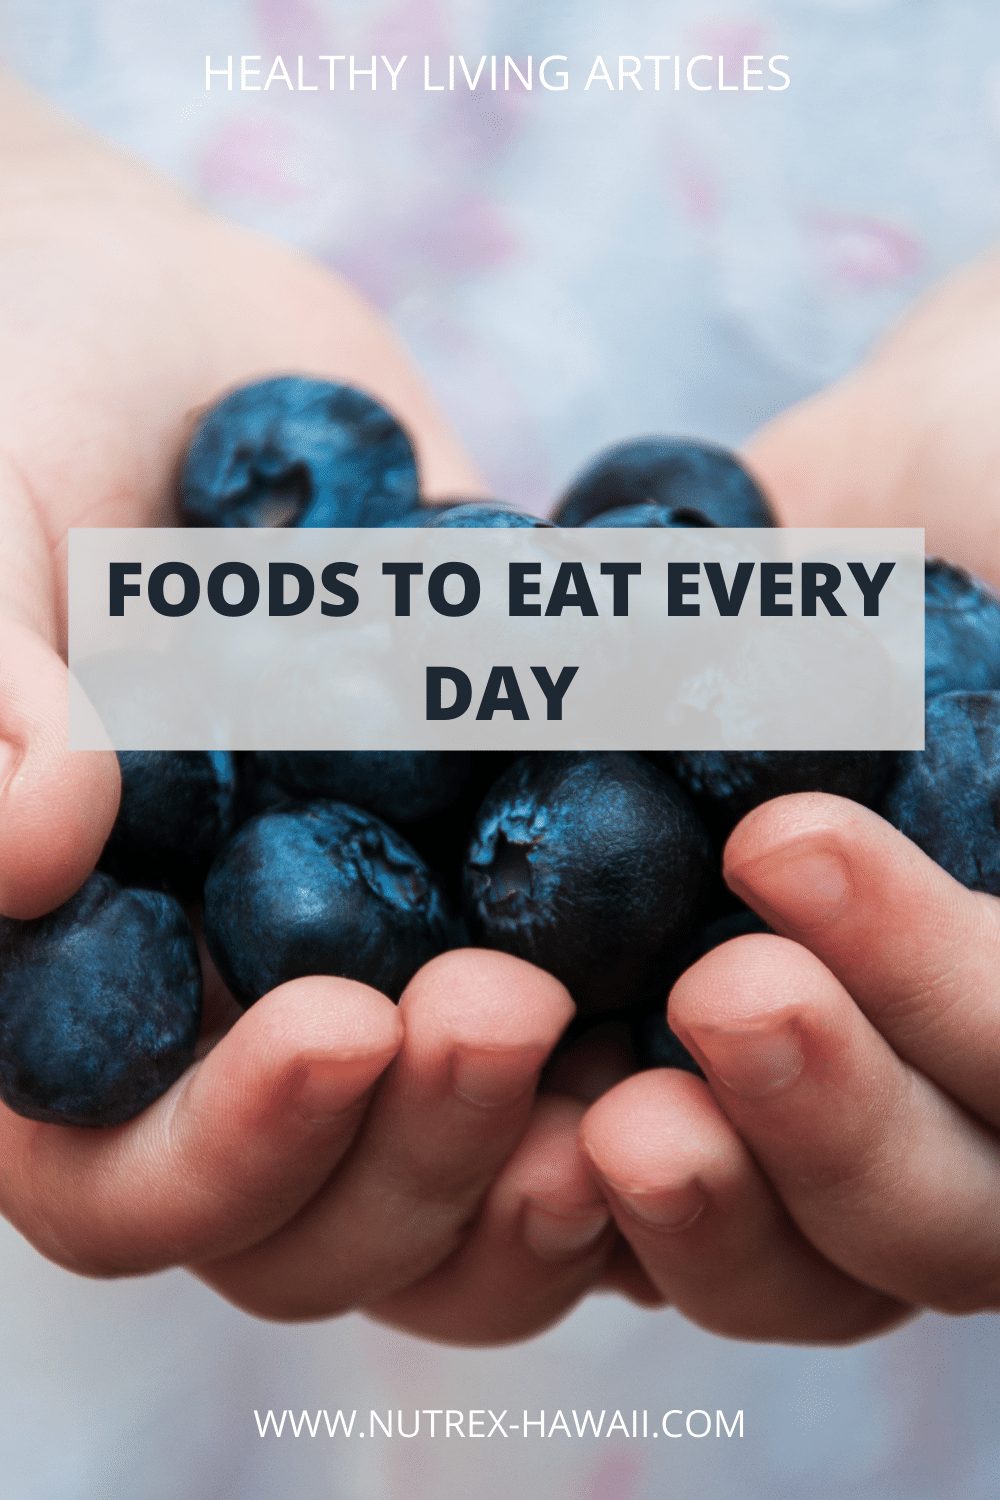 Top 7 Foods to Eat Every Day